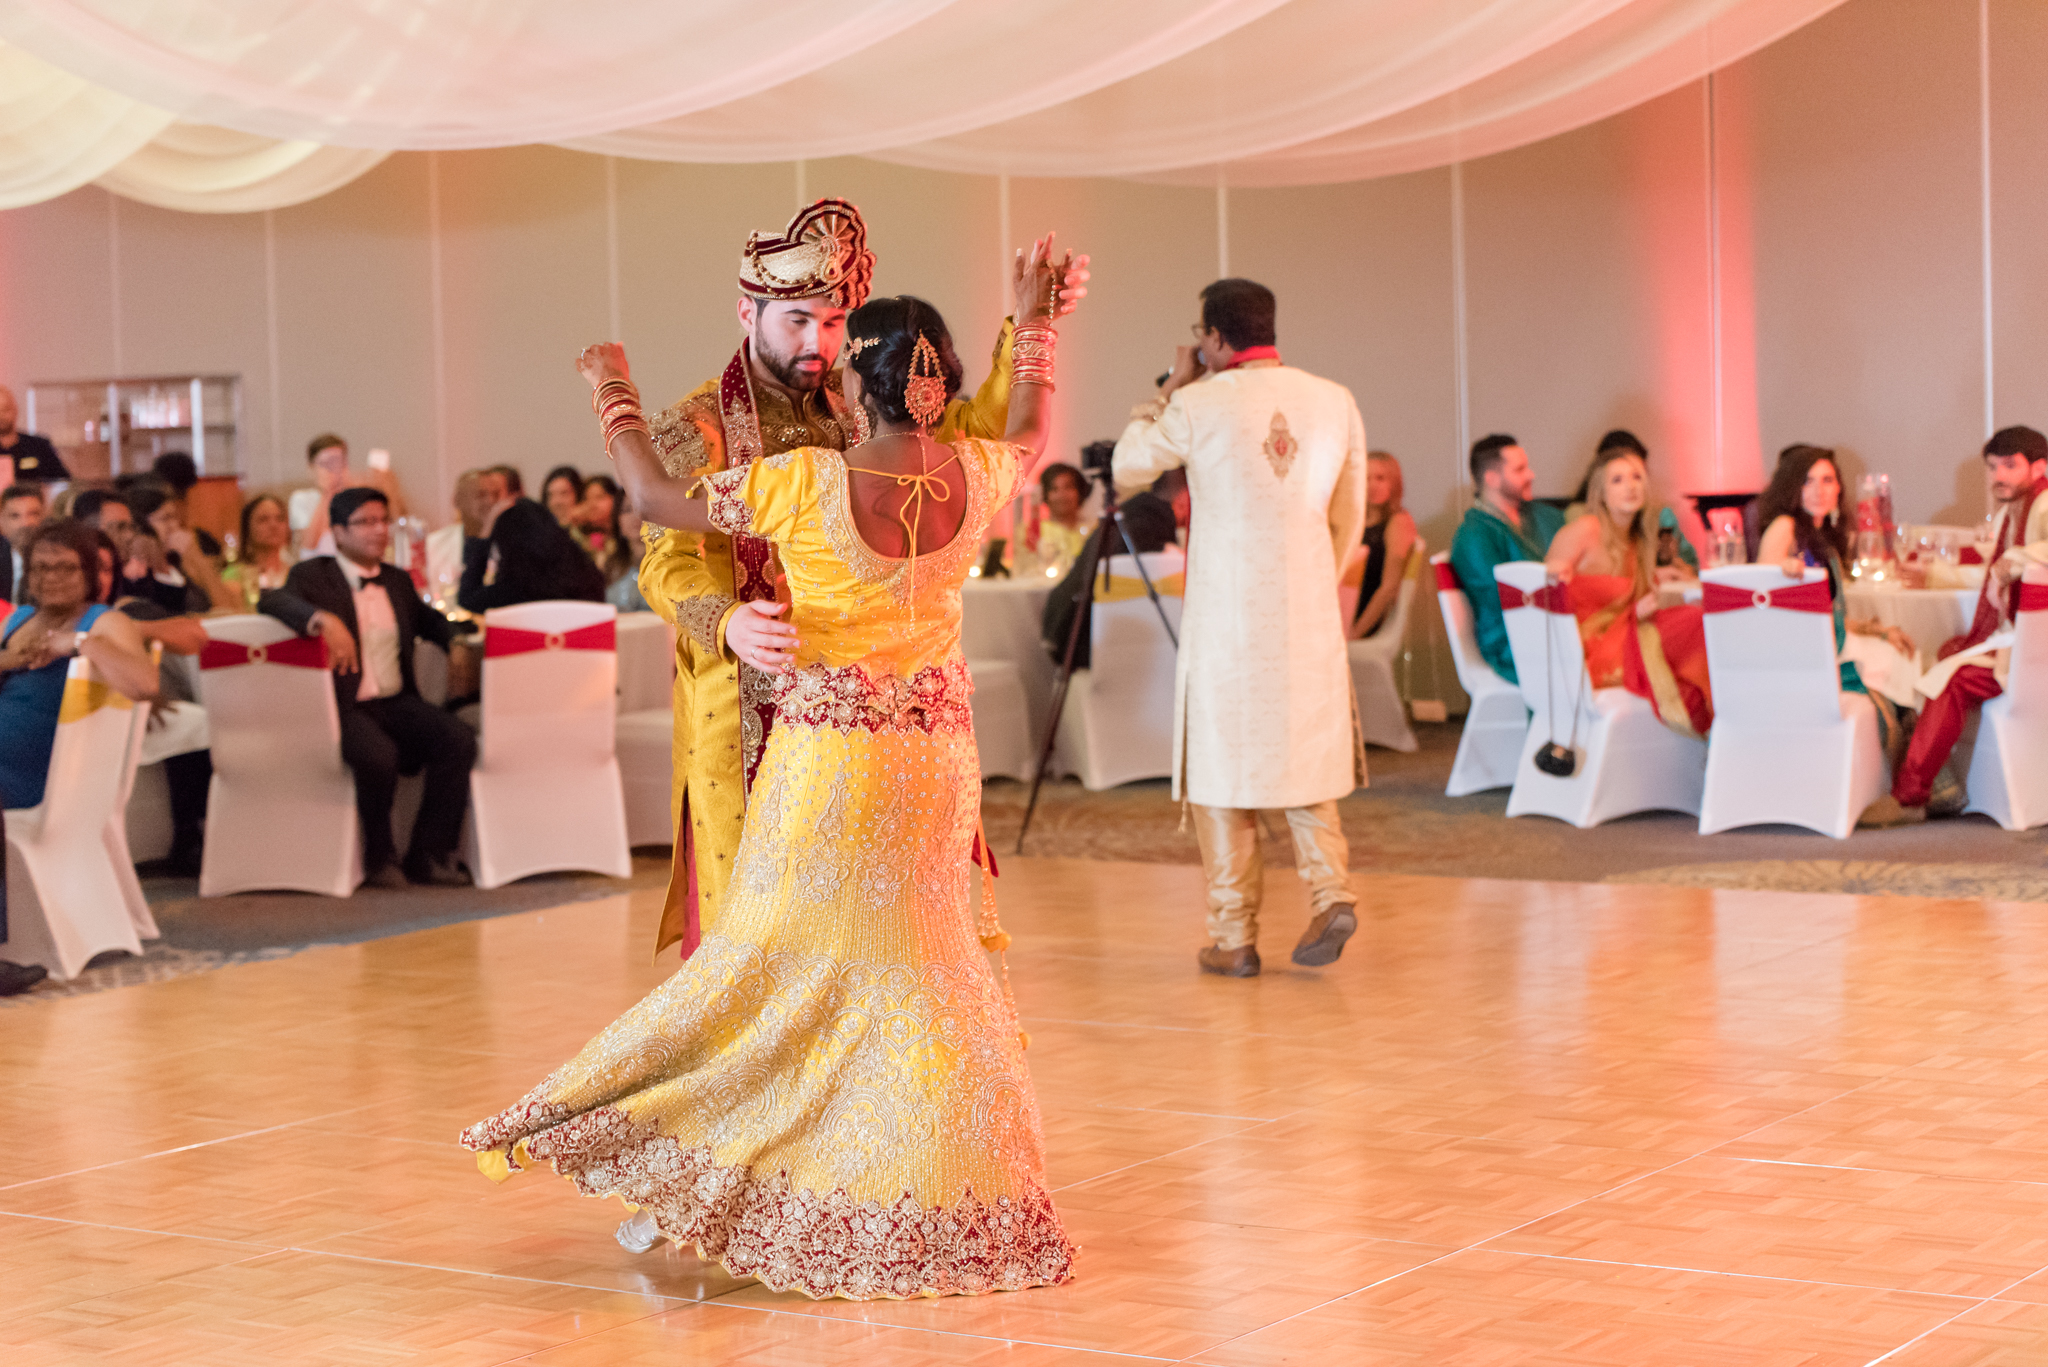 Bride and groom dance at reception.